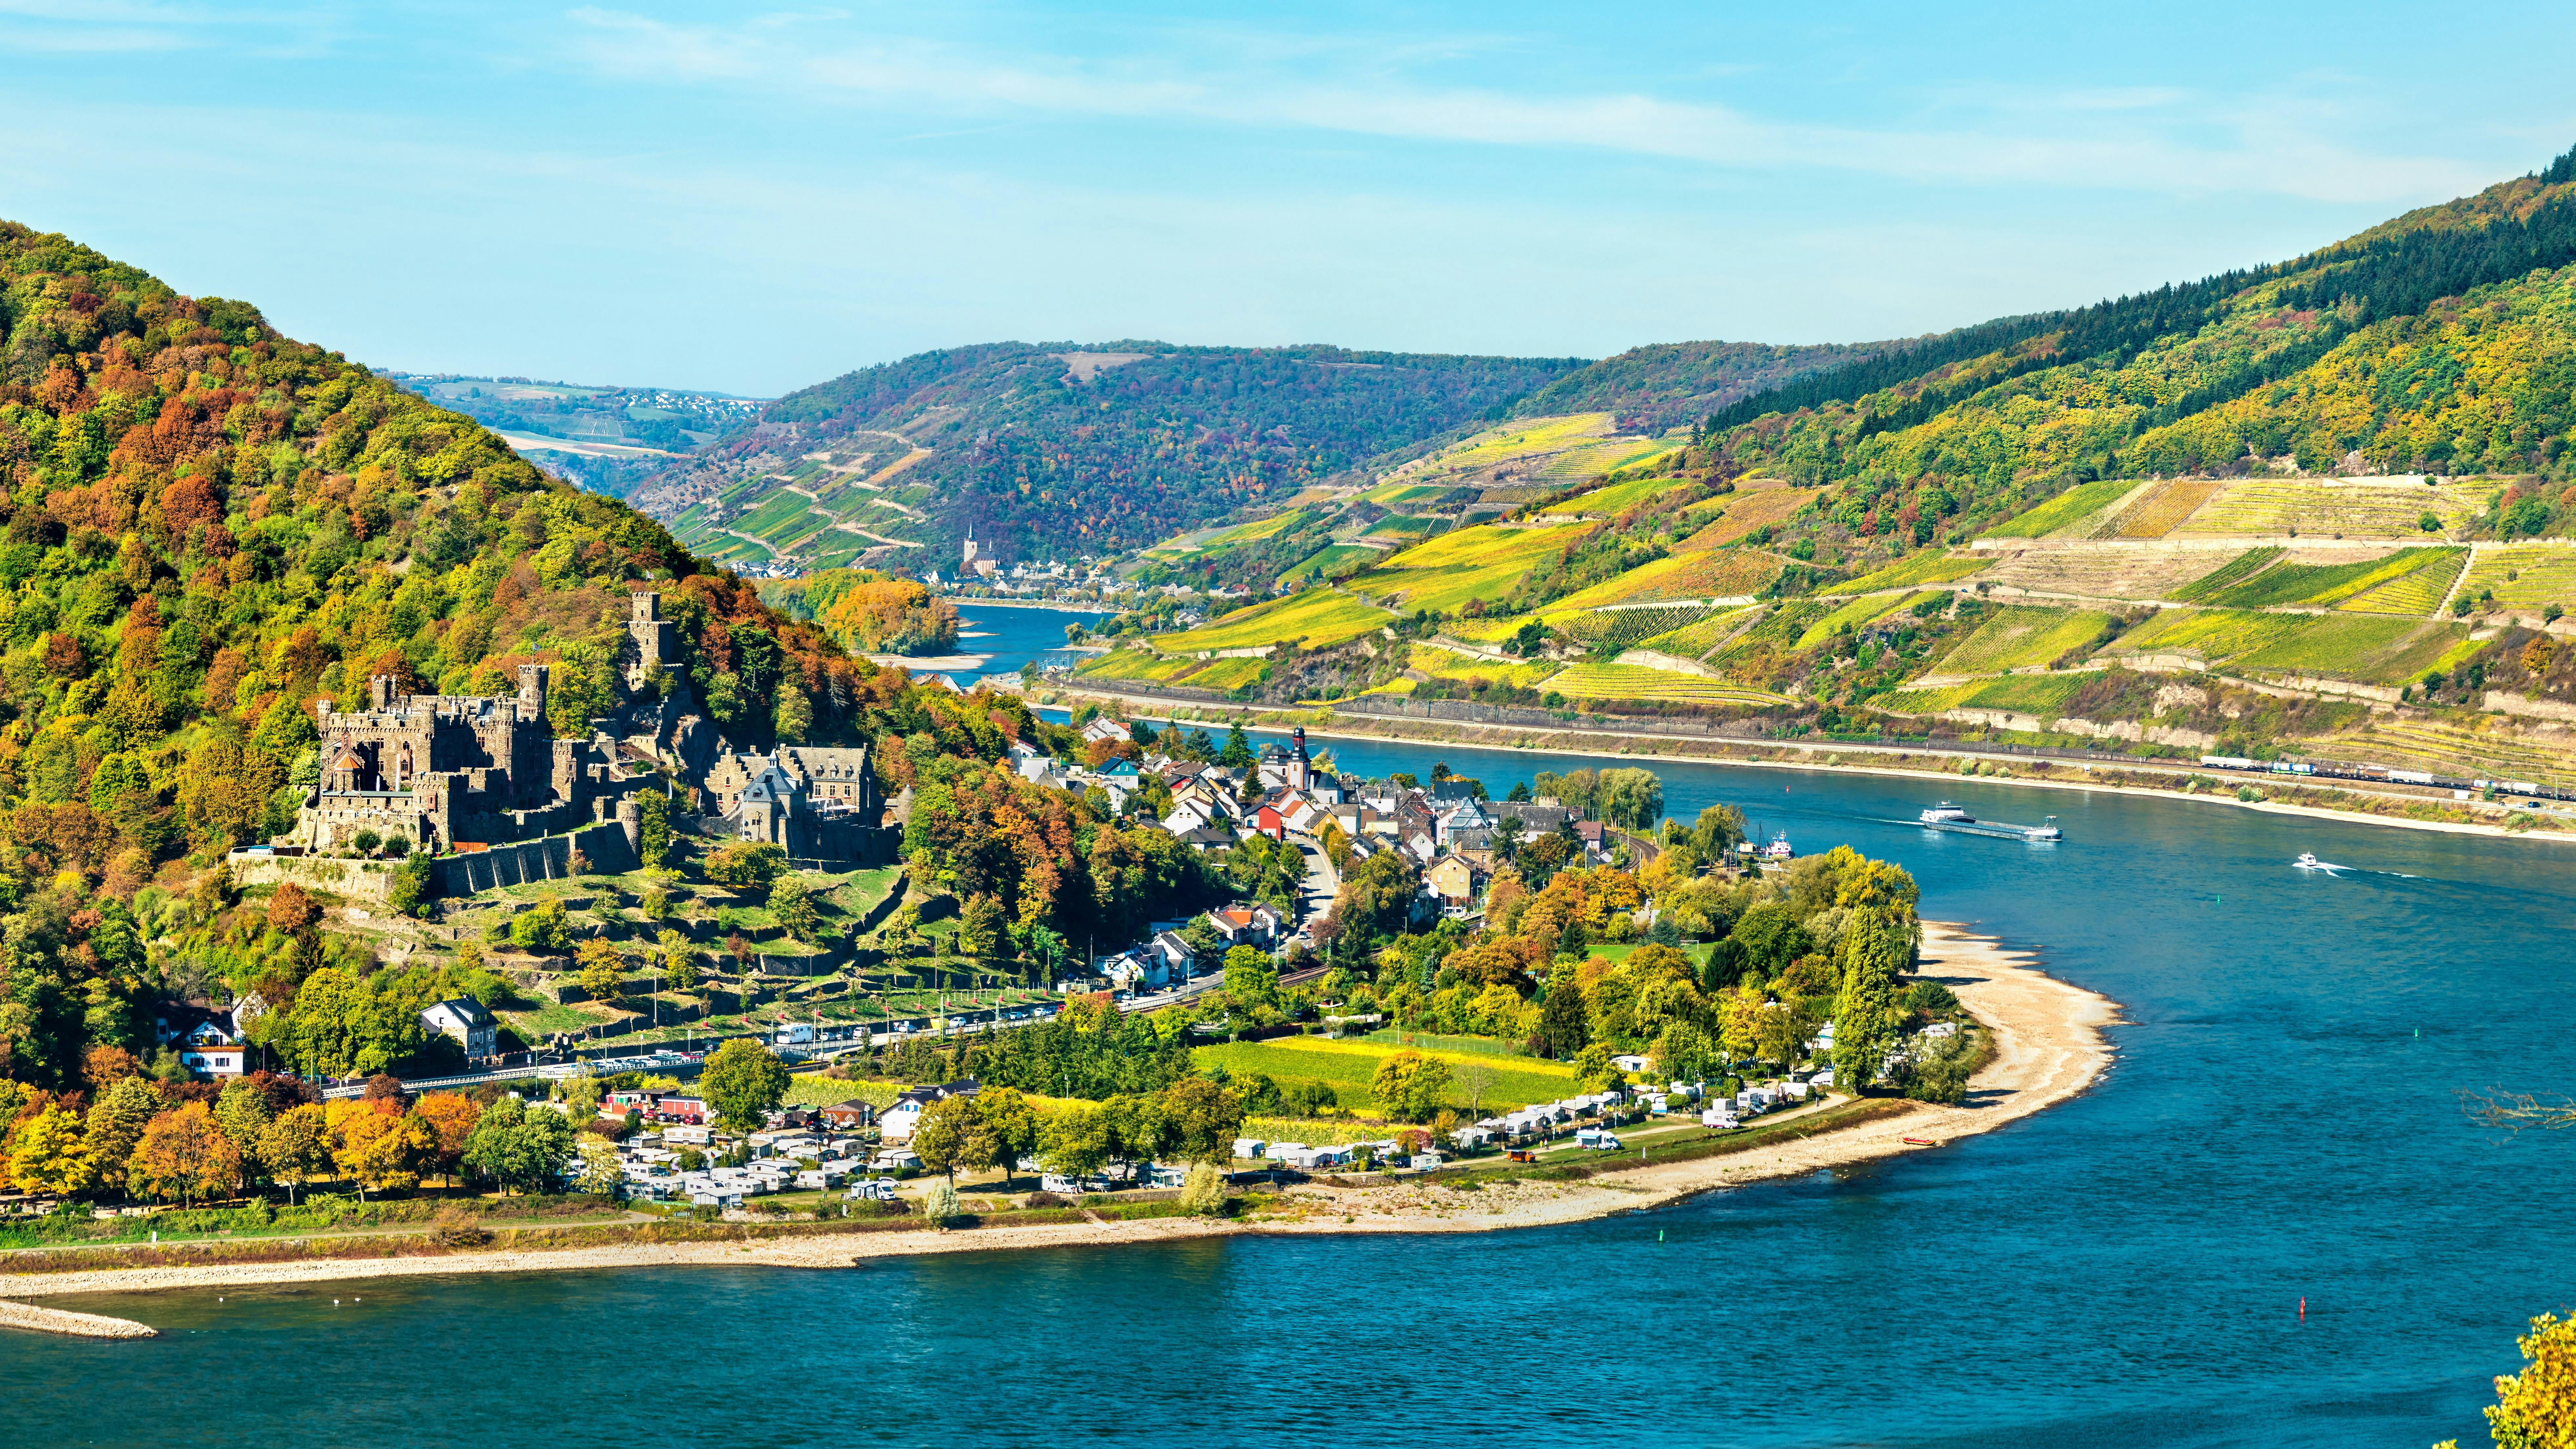 Ticket for Rhine castle cruise from Rüdesheim